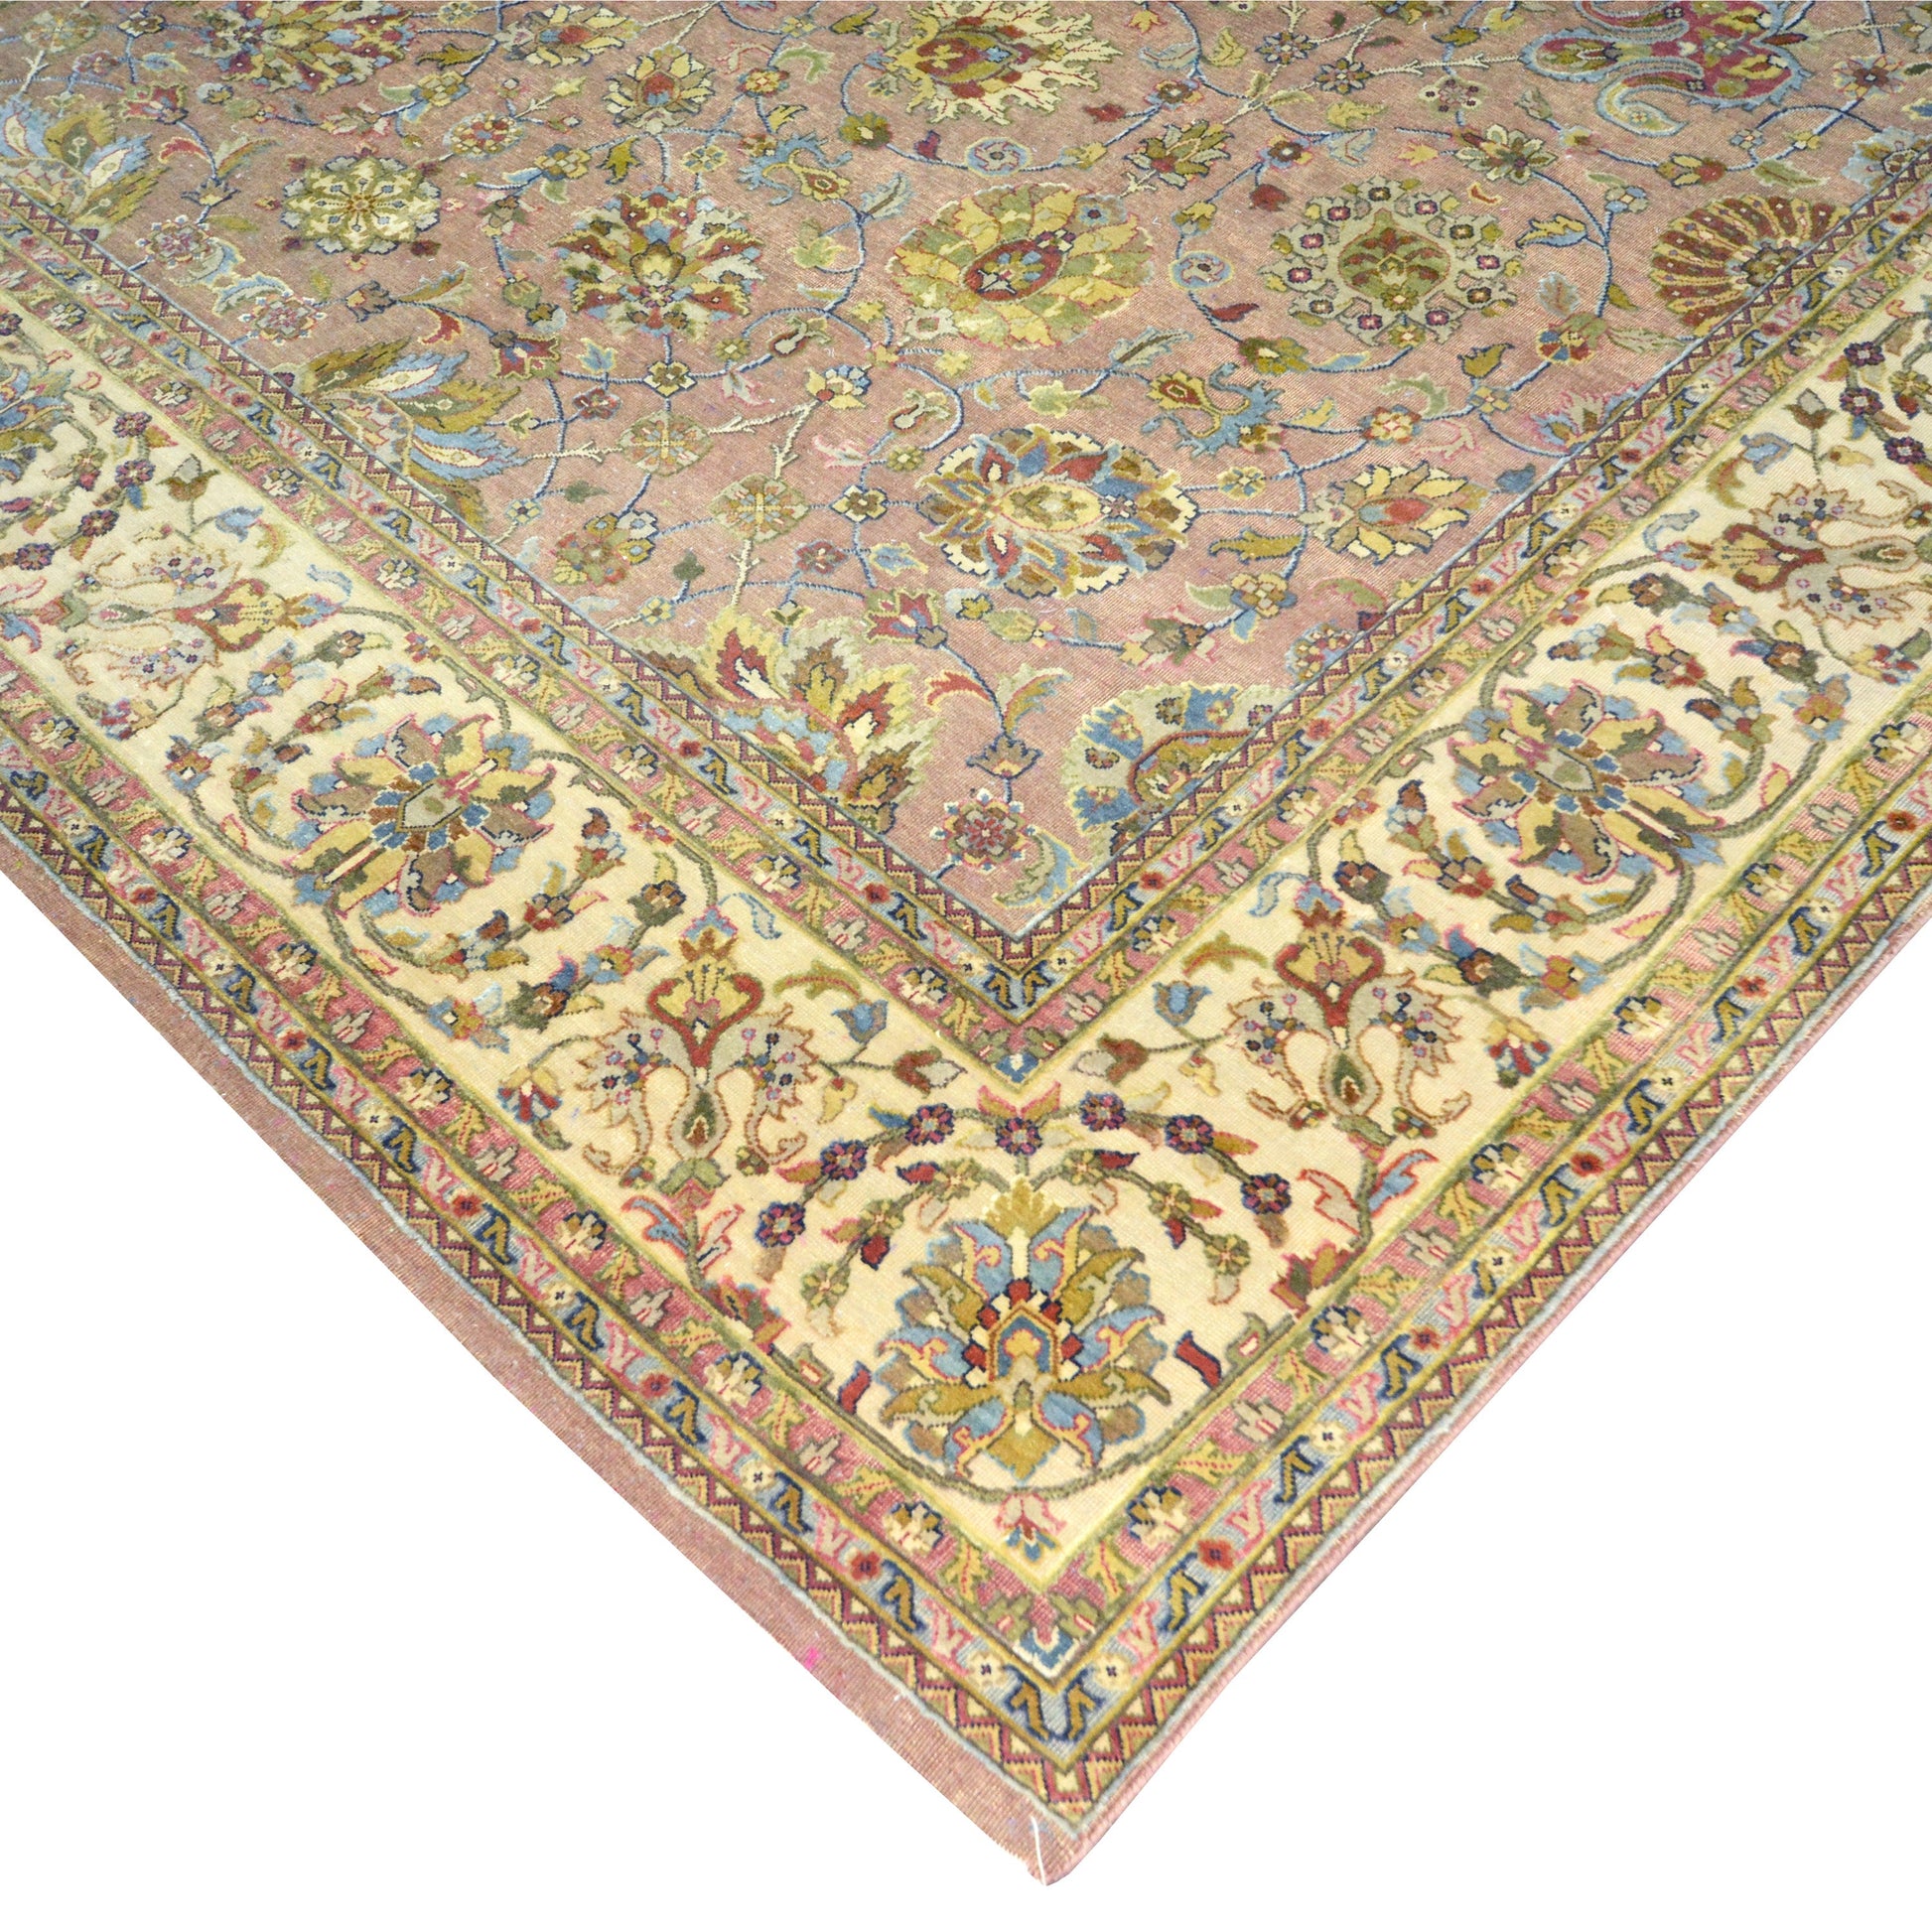 Get trendy with Mughal Brown, Camel and Rust Traditional Samarkand Luxury Handknotted Area Rug - Traditional Rugs available at Jaipur Oriental Rugs. Grab yours for $4125.00 today!